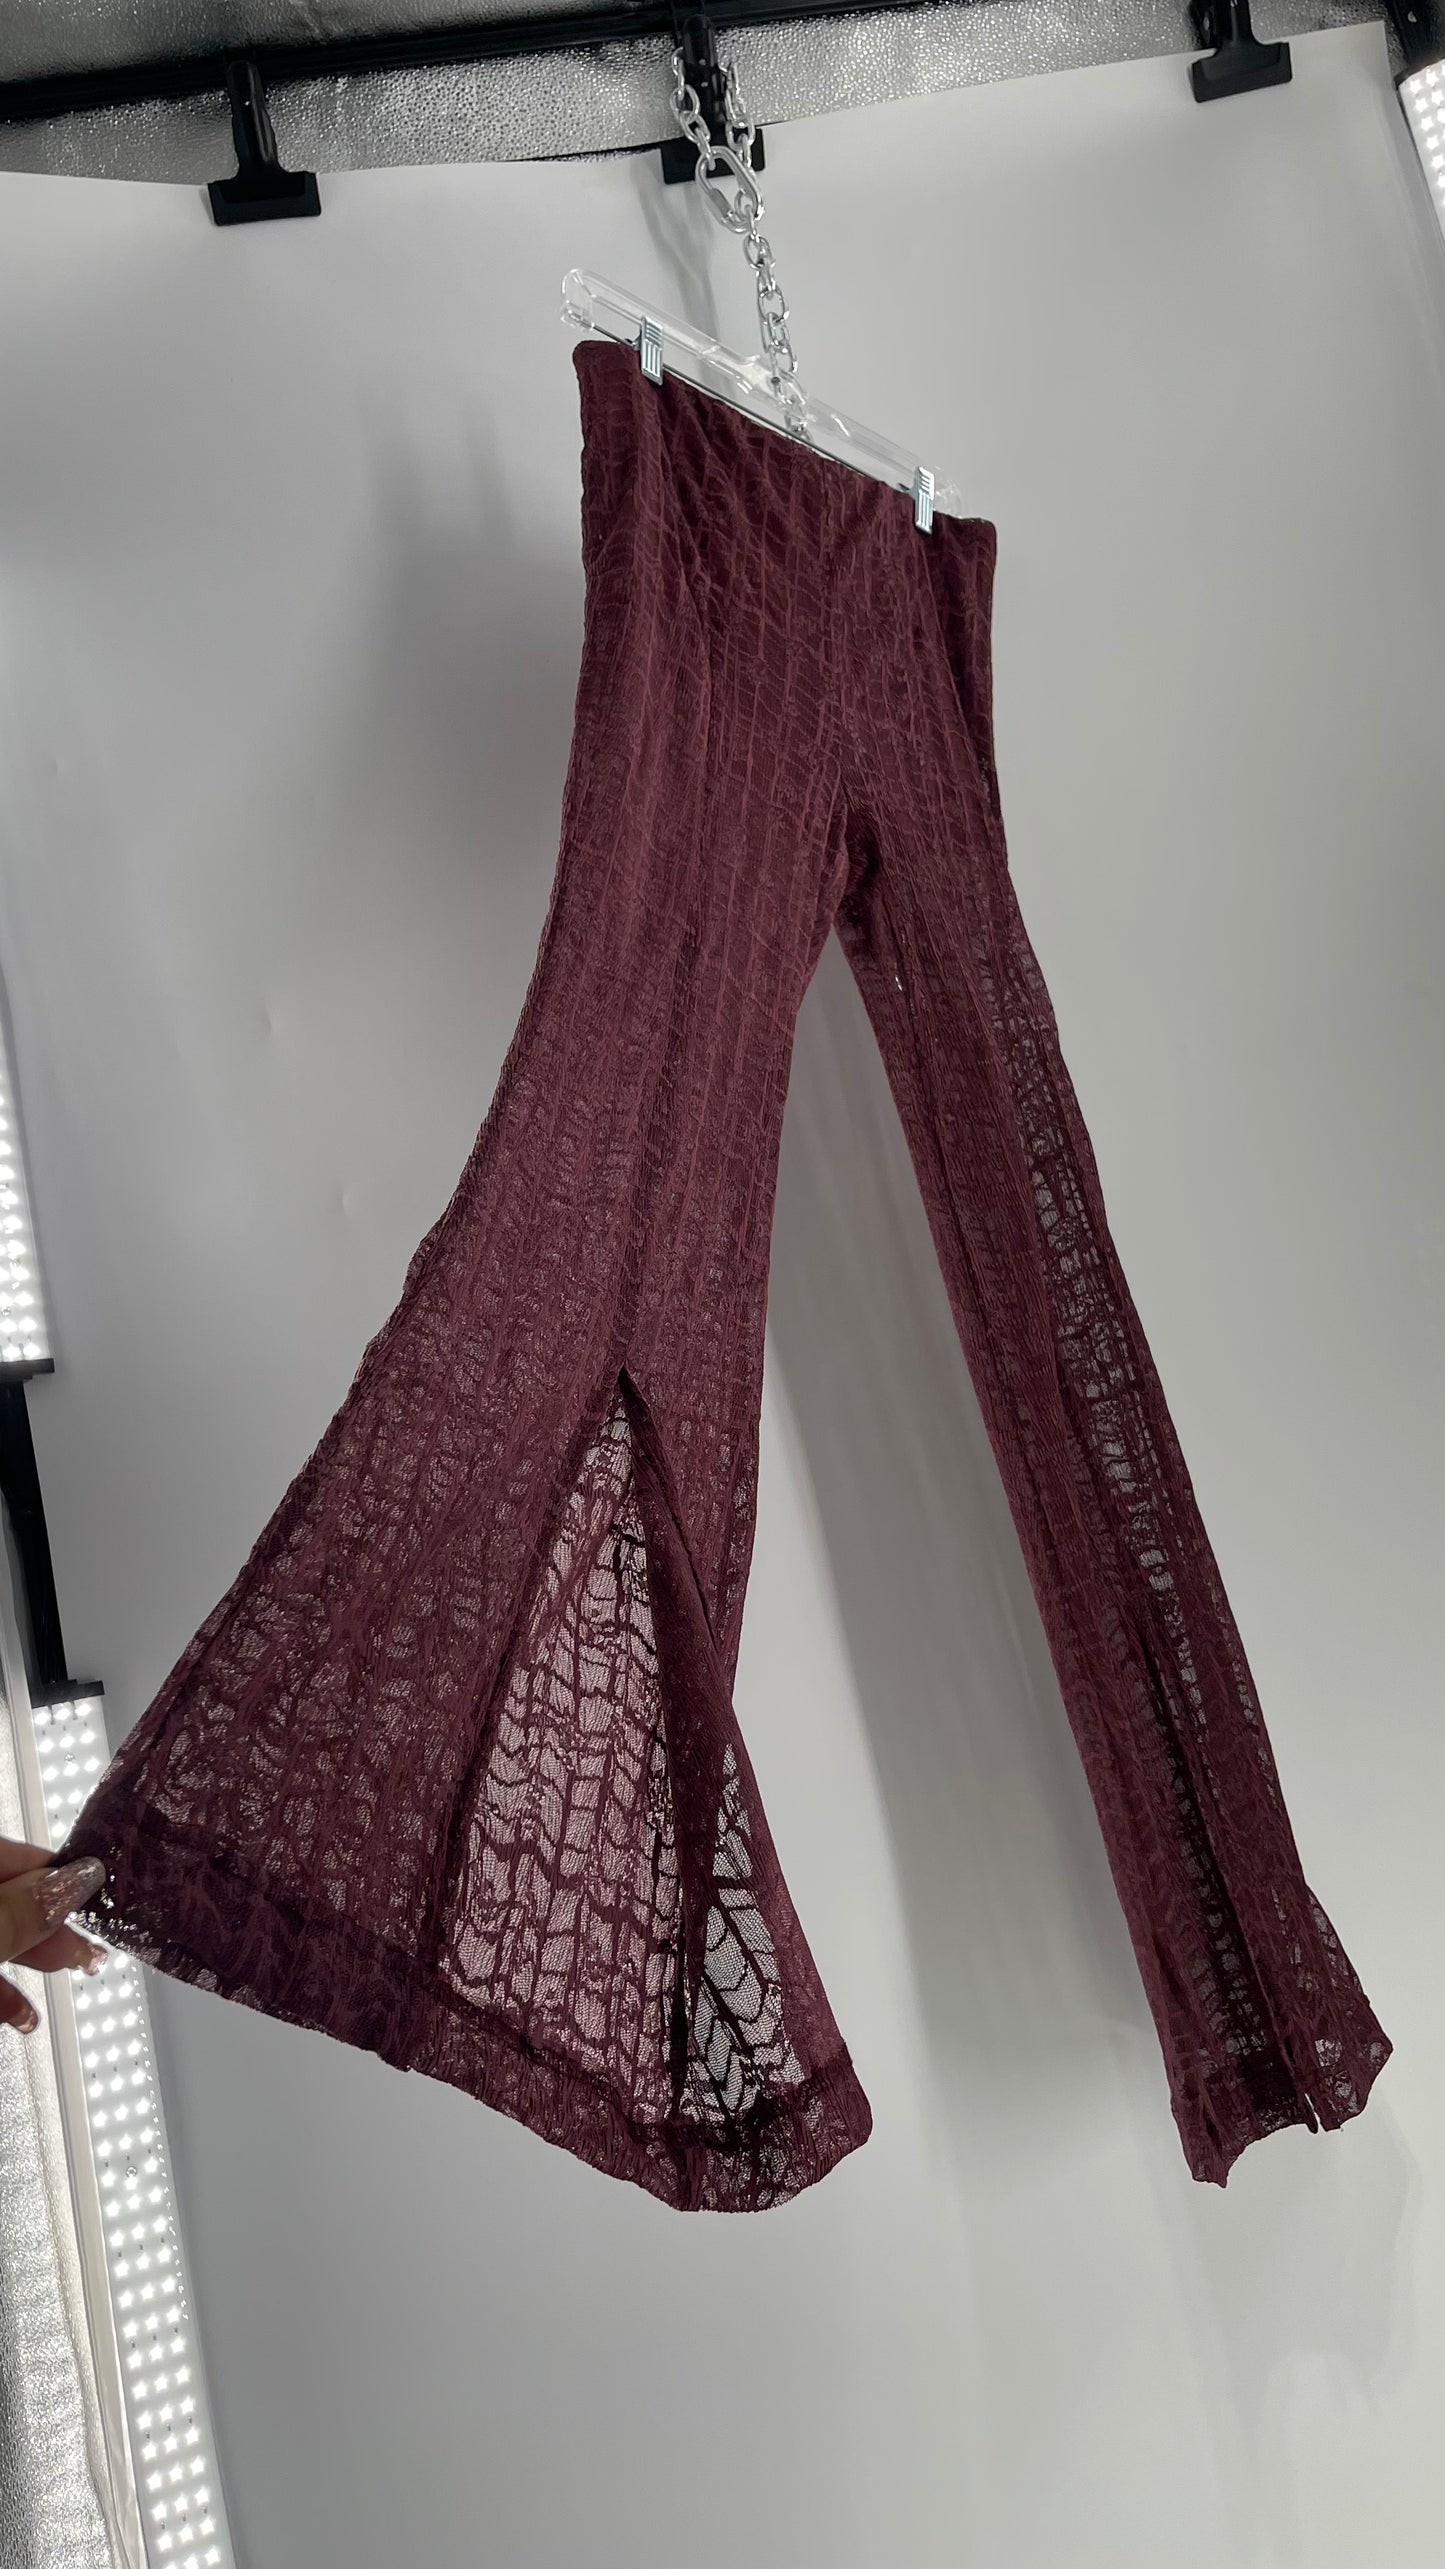 Free People Plum Lace Flares with Vented Hem and Sewn in Shorts Tags Attached (Medium)